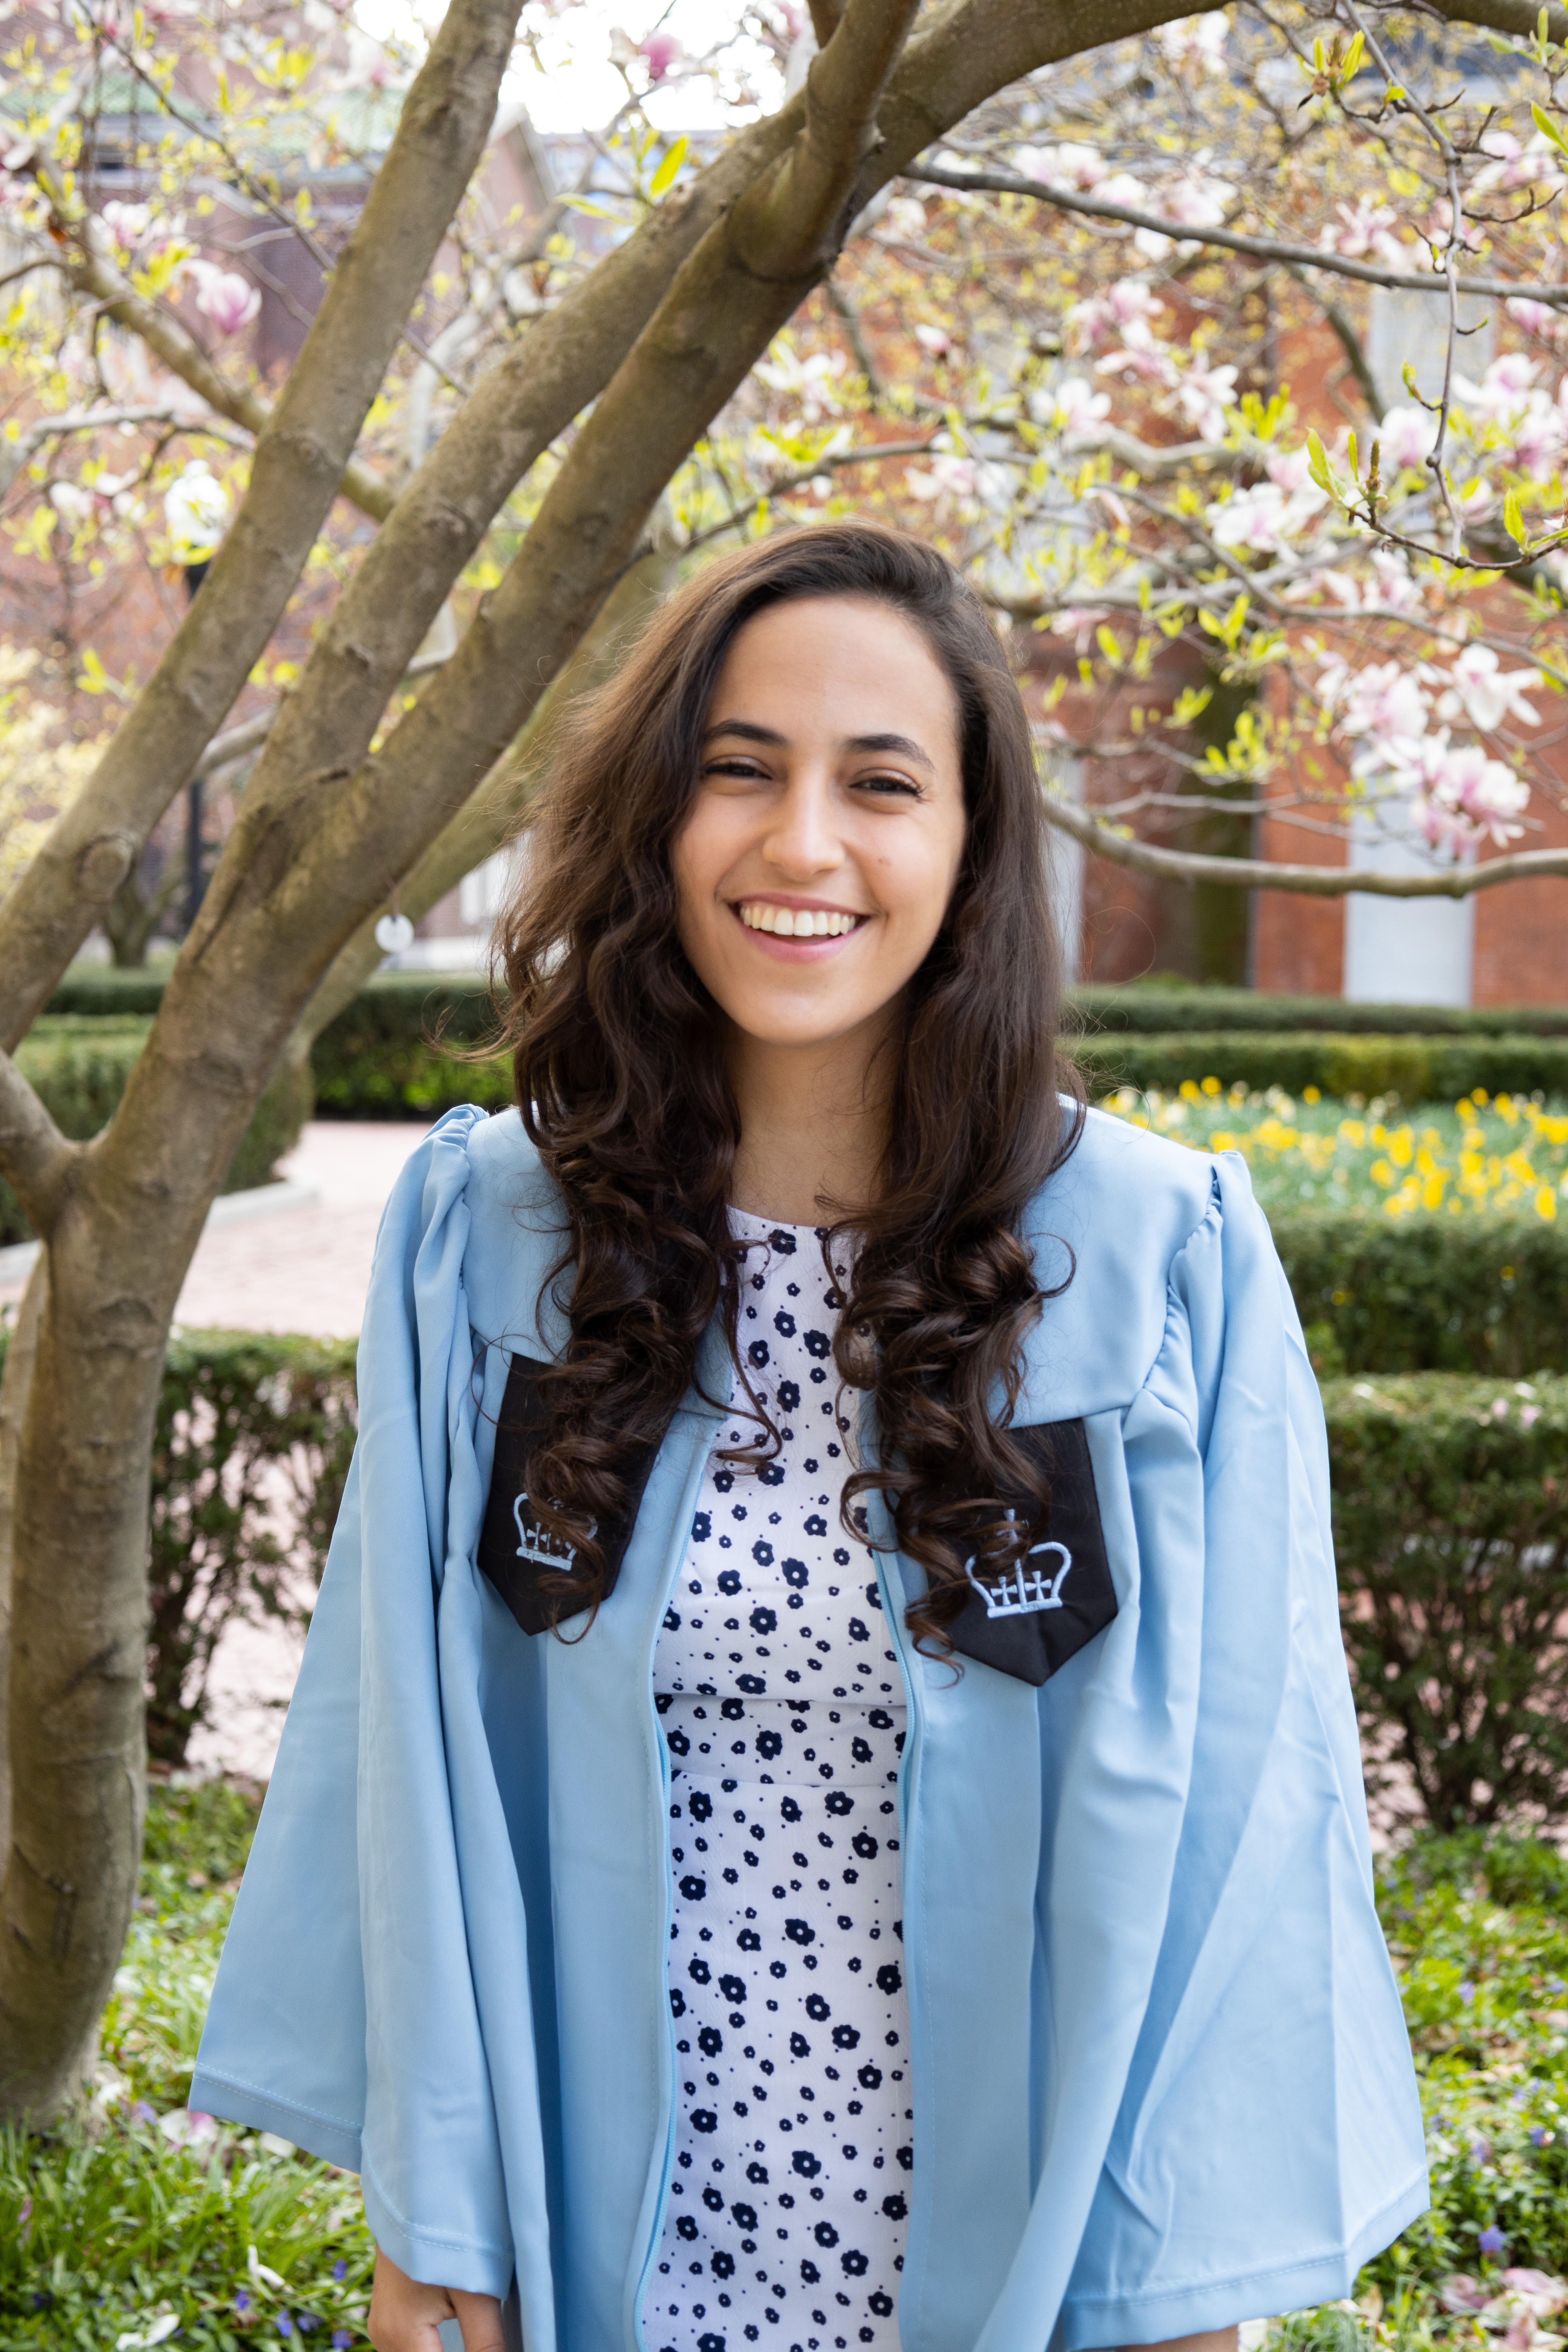 Sophia Houdaigui in her light blue graduation gown standing outside in front of a tree